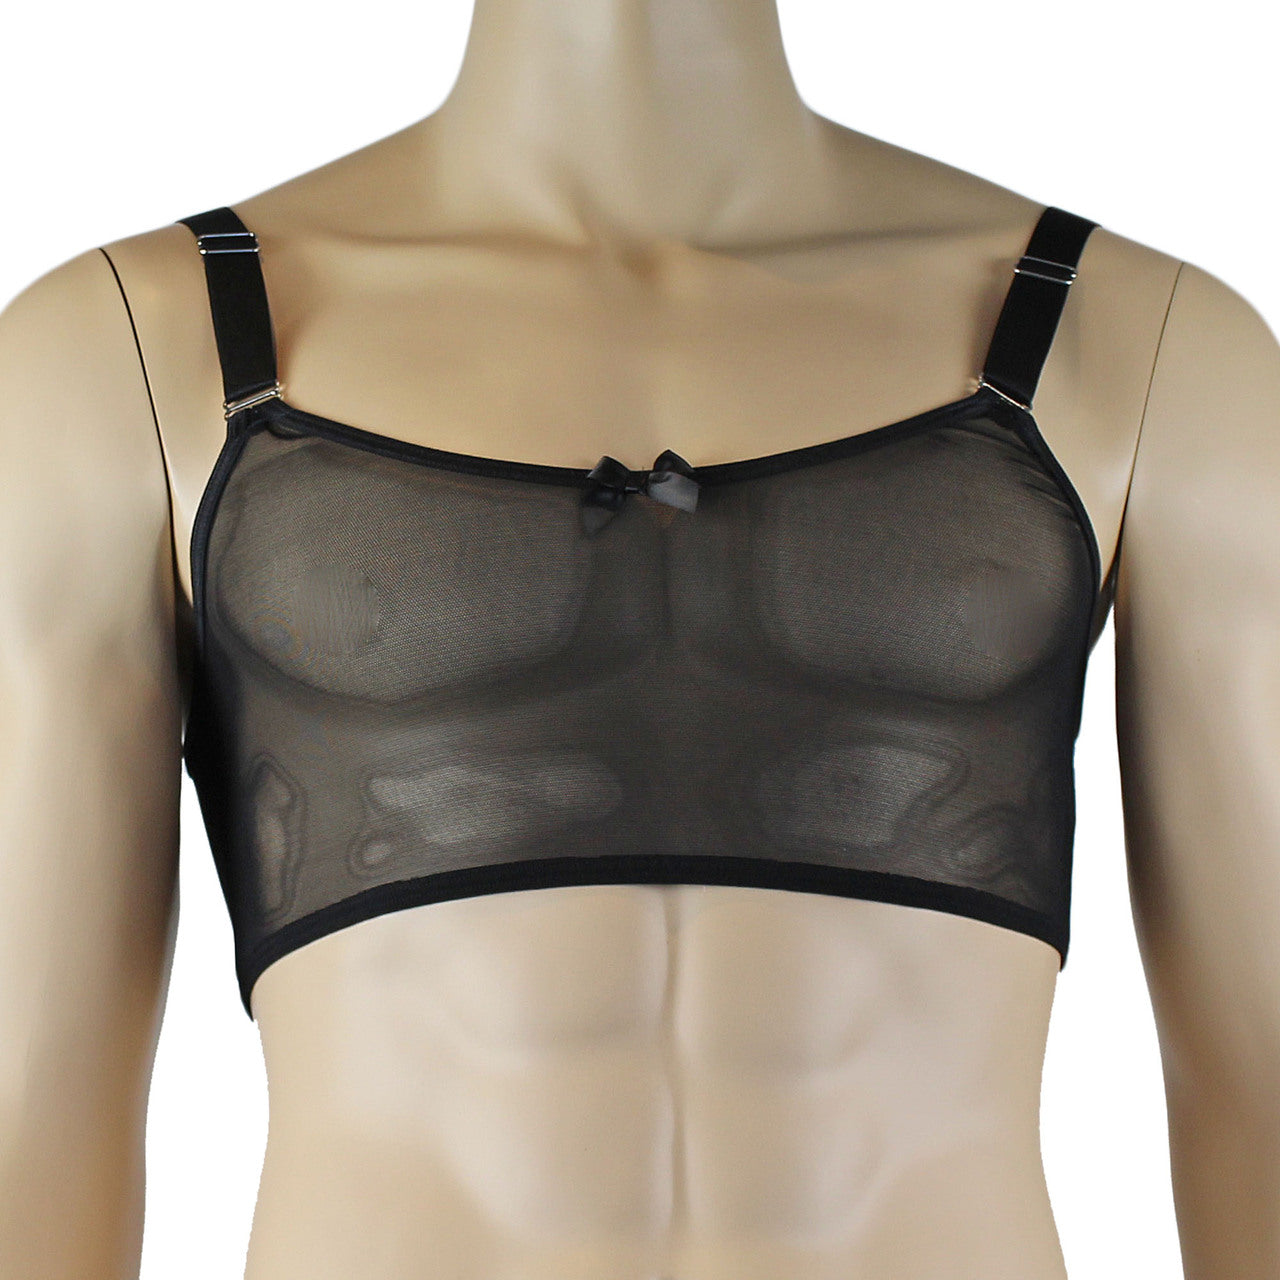 Mens Exotic Sheer Mesh Crop Bra Top Camisole - Sizes up to 3XL Black